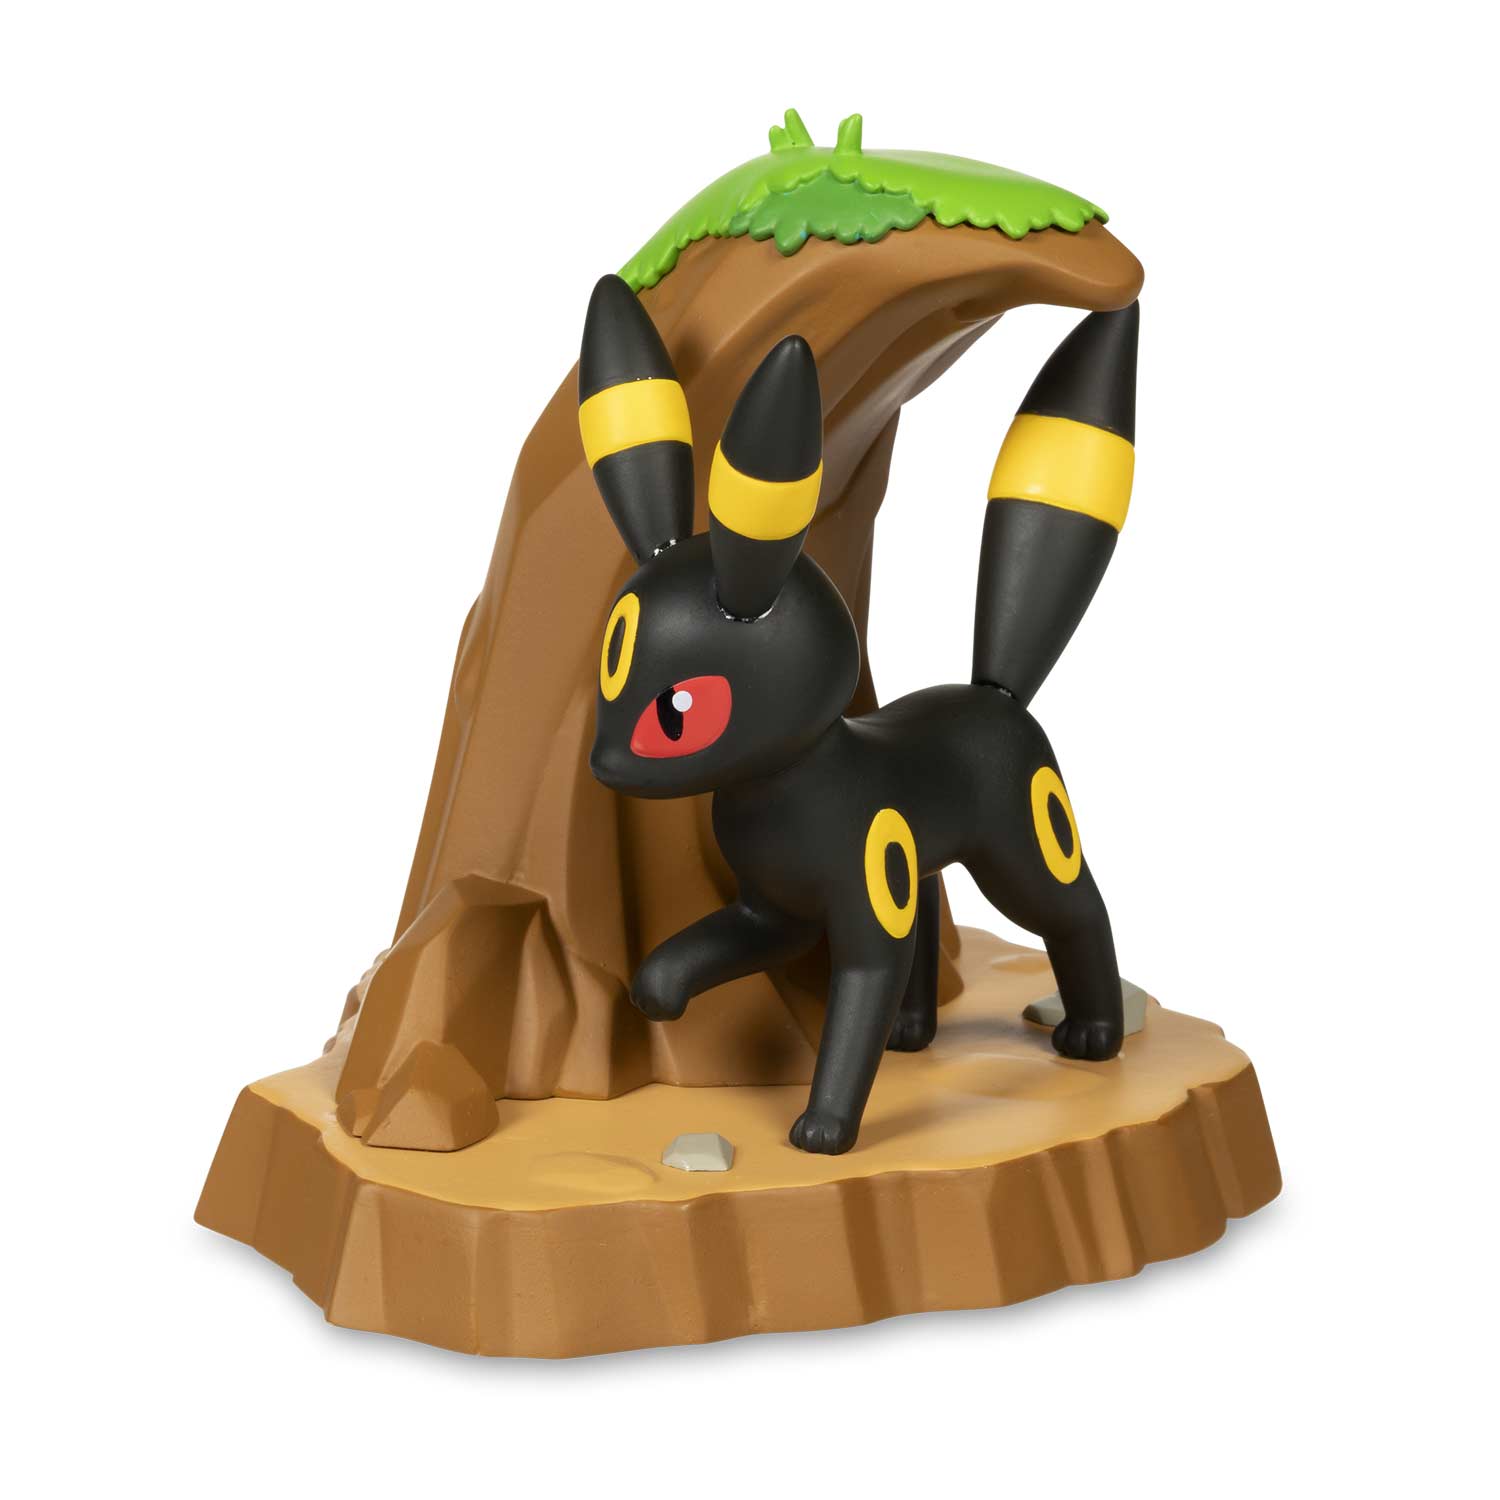 Profile picture umbreon September 2021